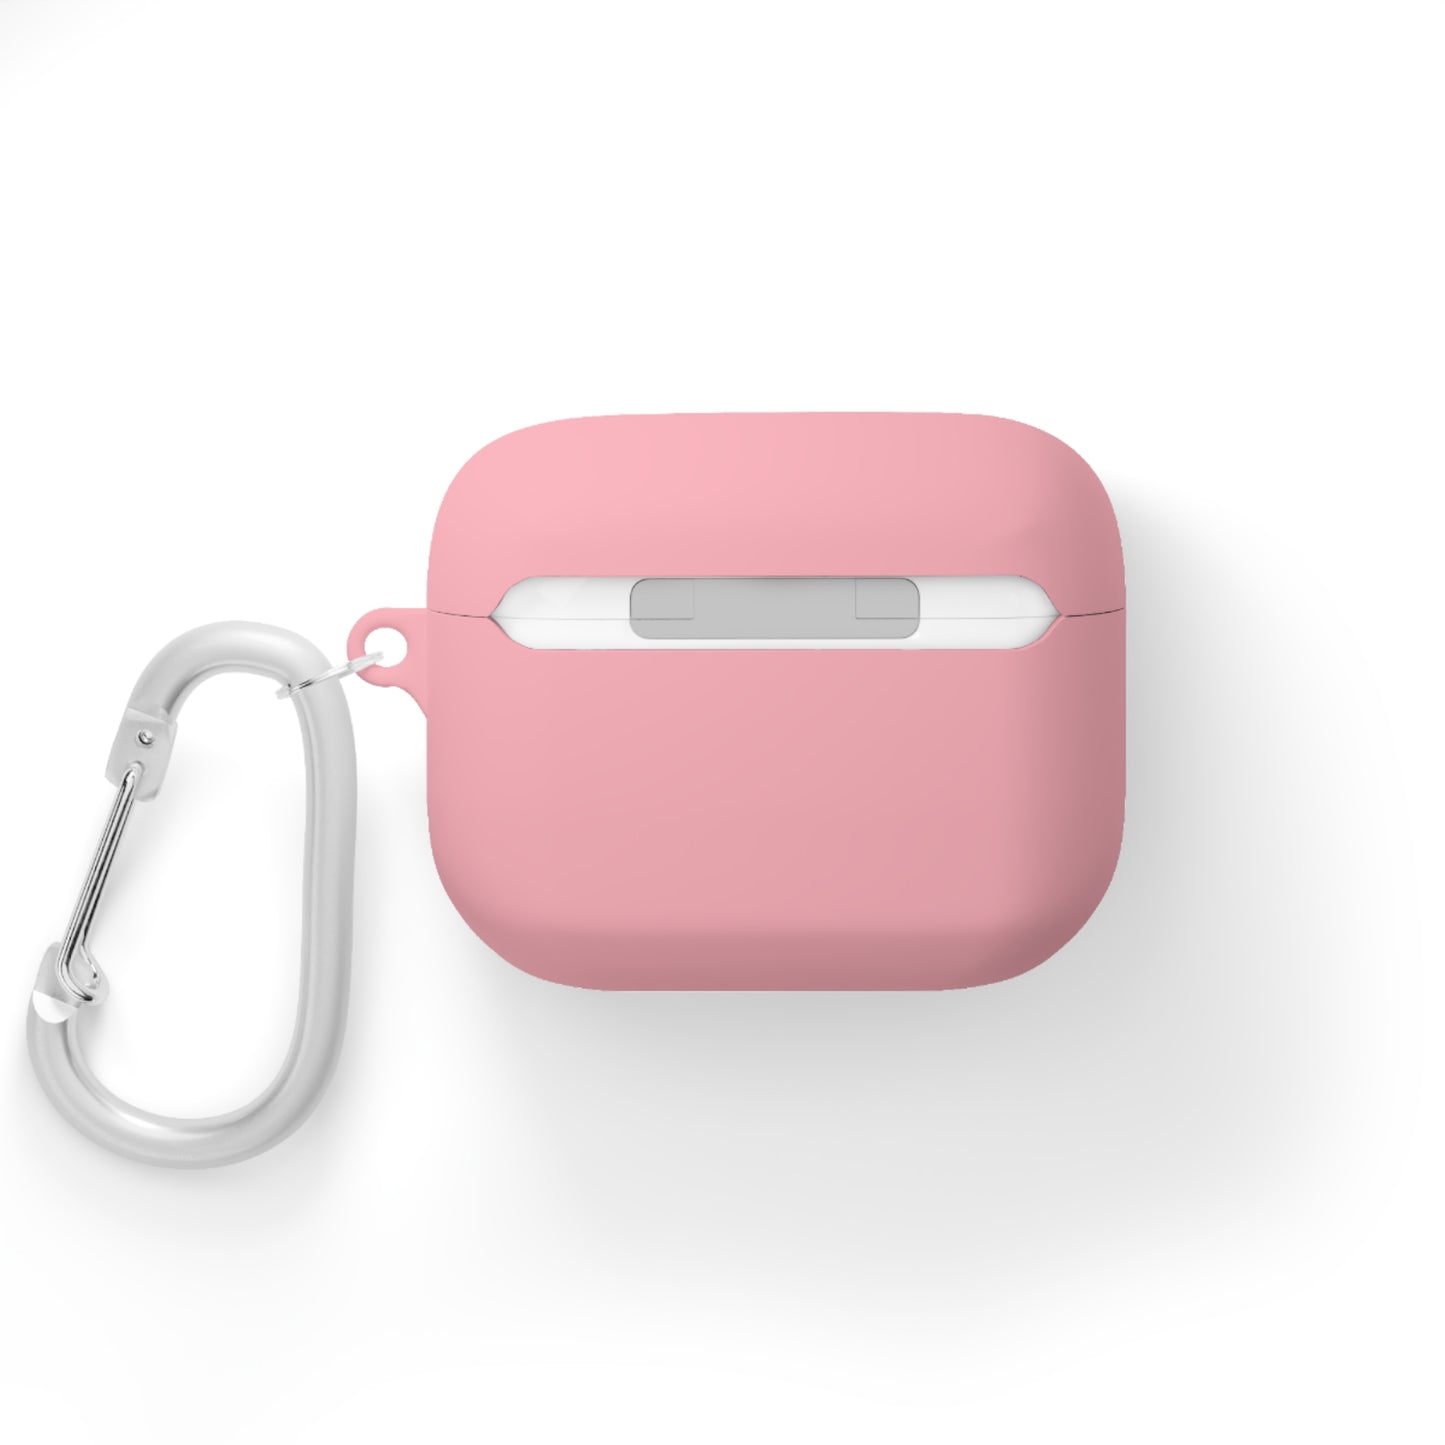 Meow a boo Cat AirPods and AirPods Pro Case Cover